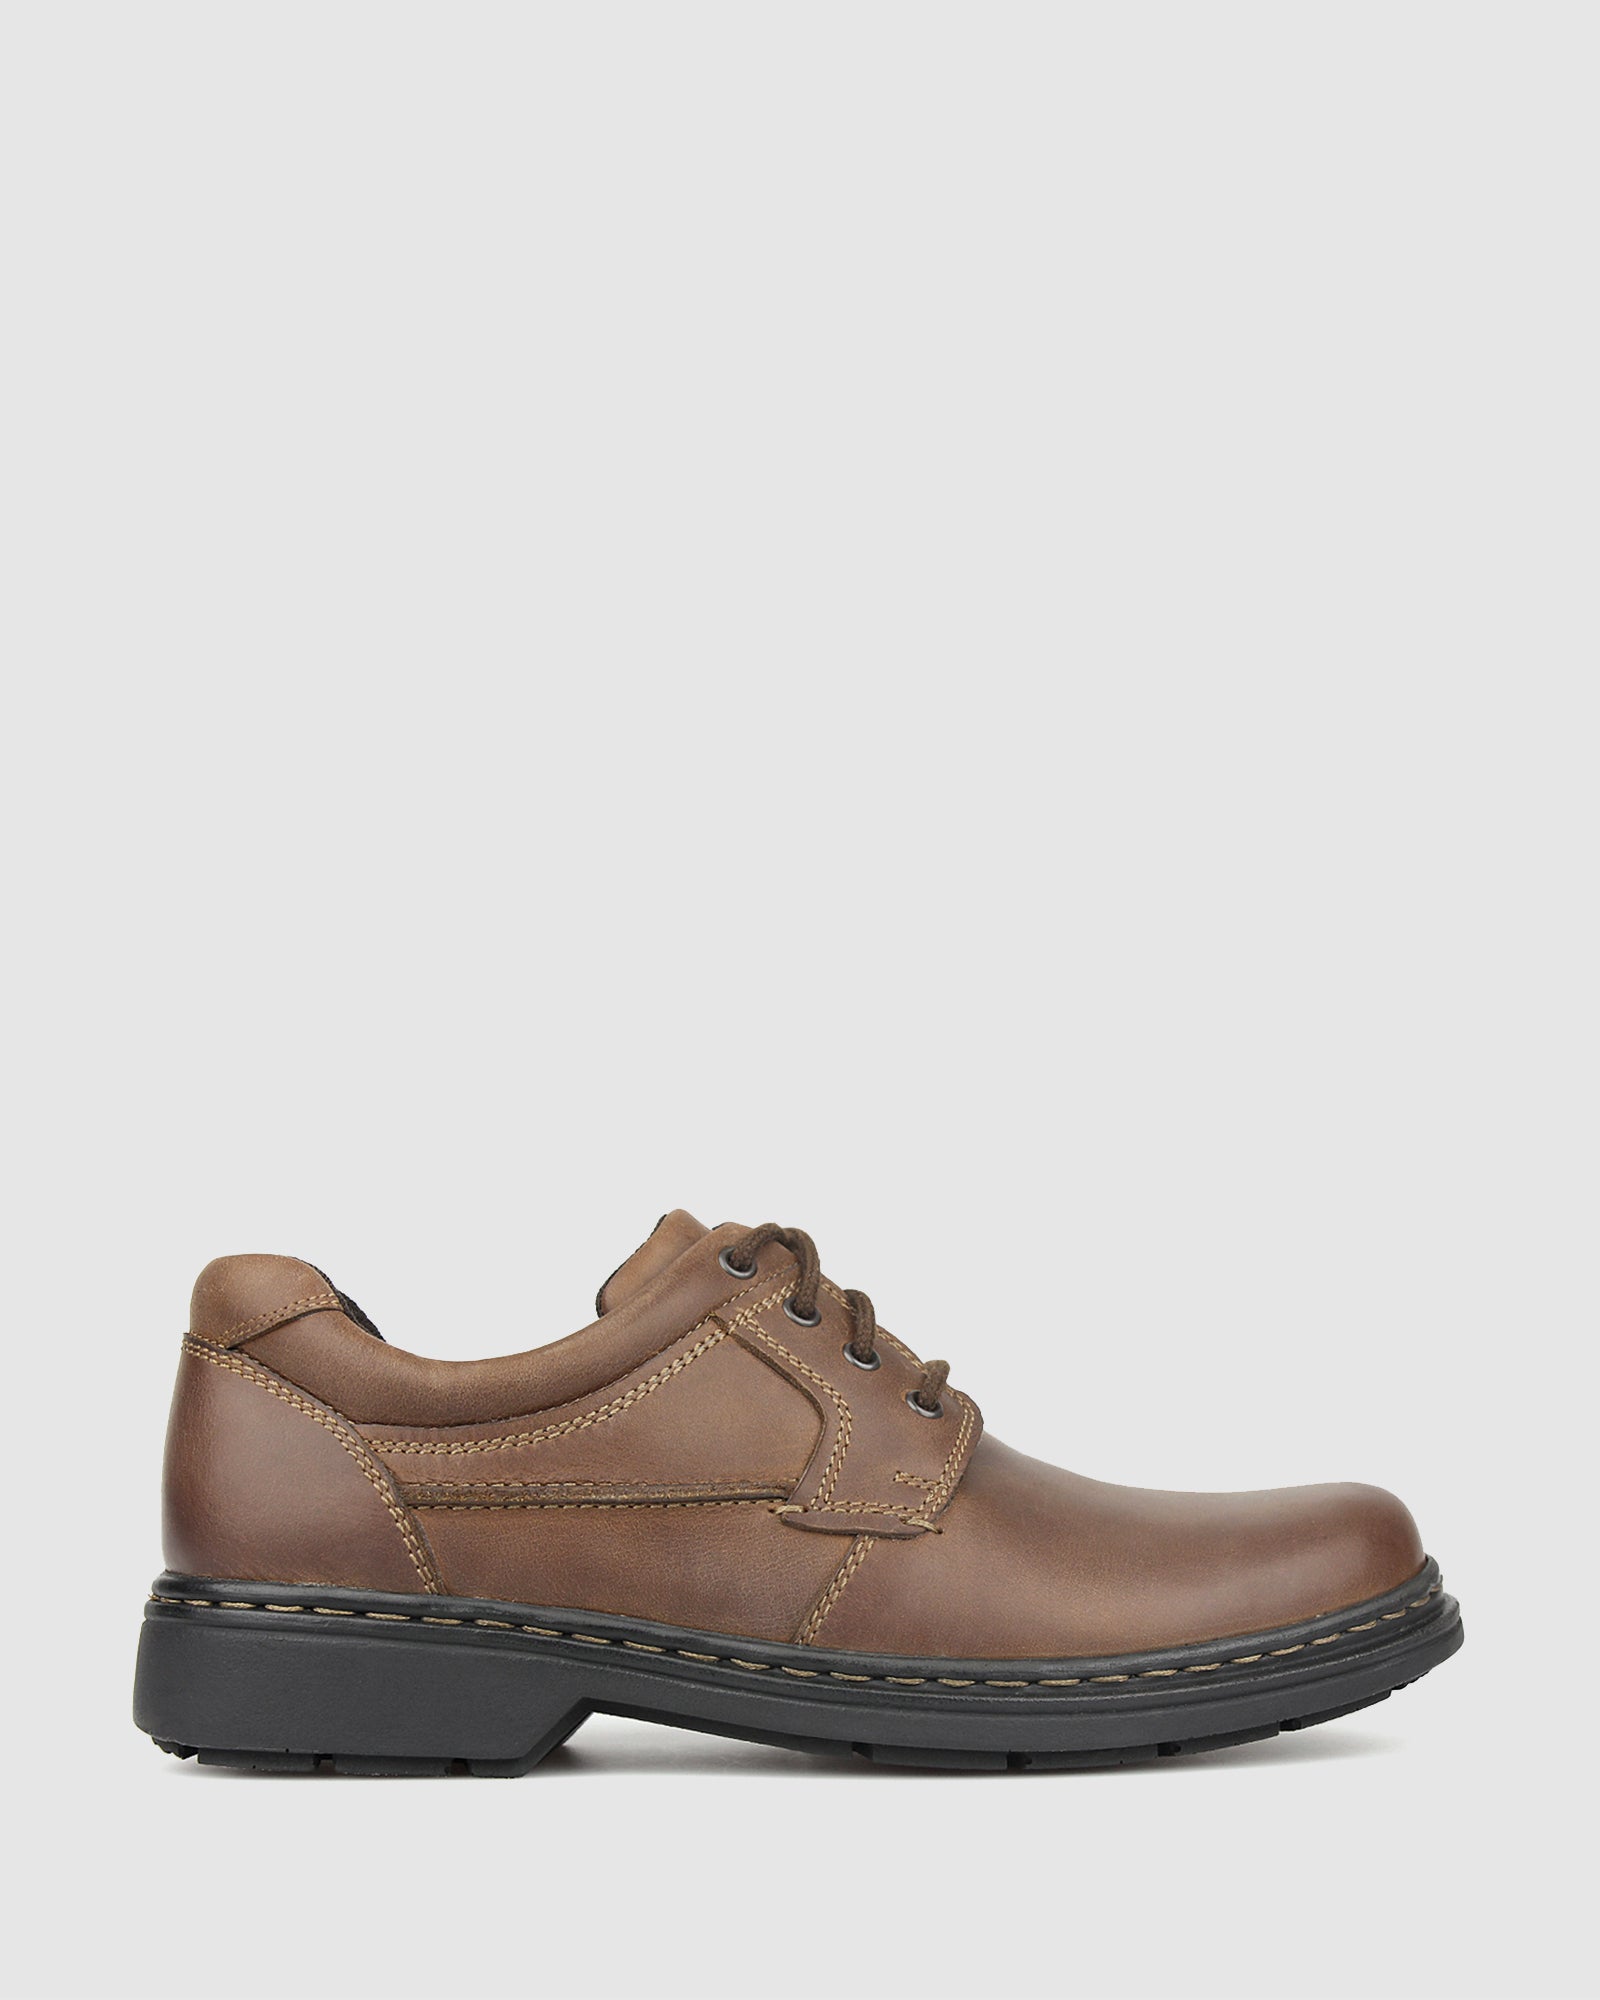 Buy LARRY Leather Comfort Shoes by Airflex online - Betts